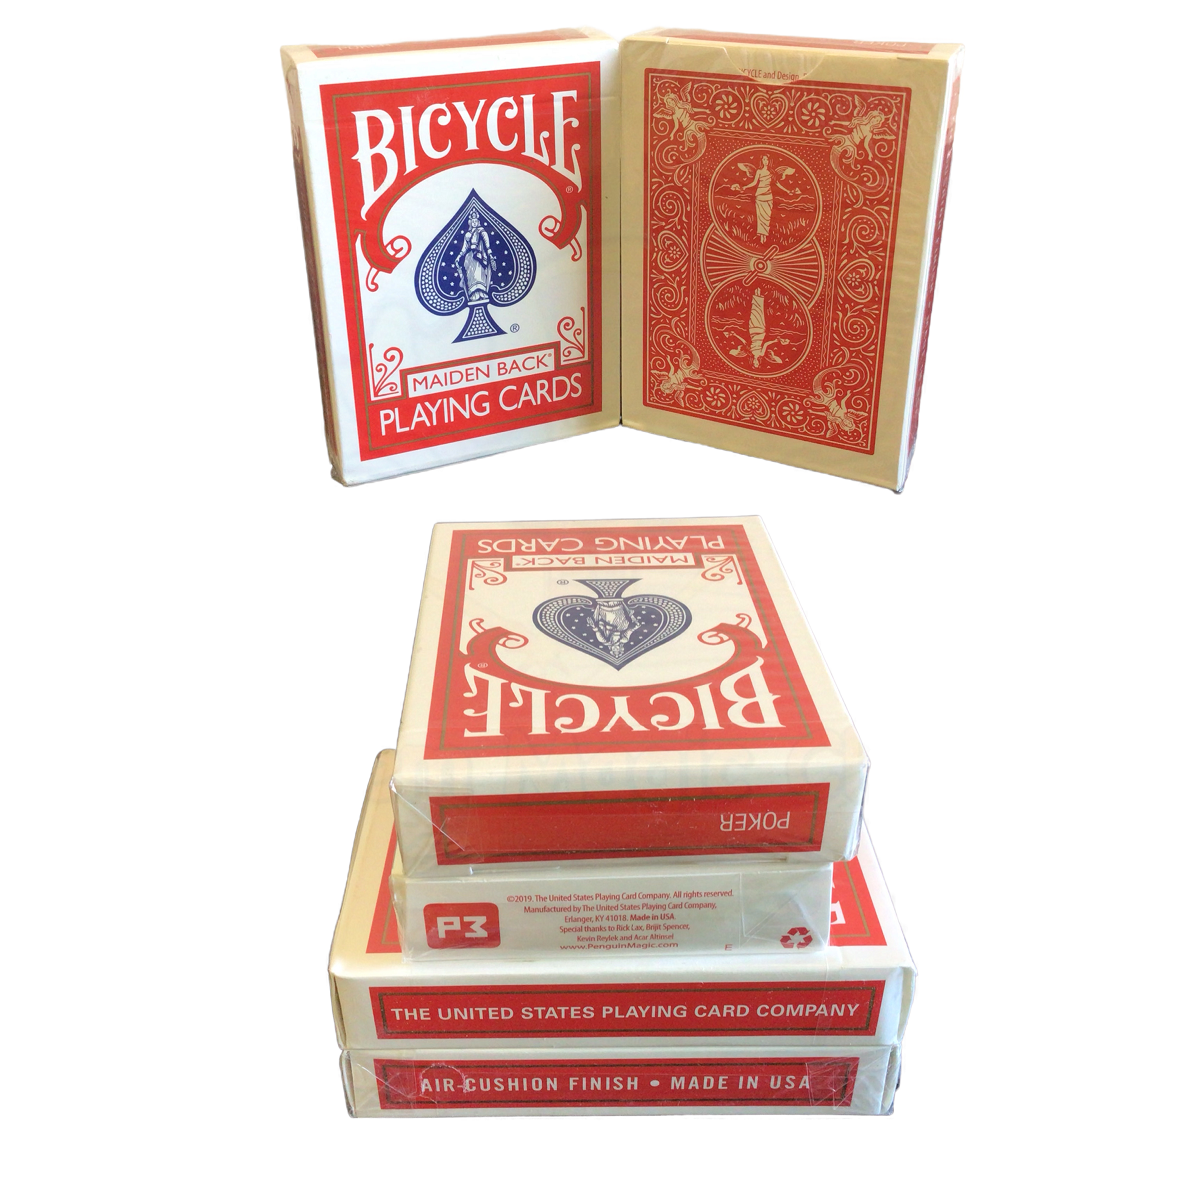 Bicycle Maiden Back Barcode Marked Cards for Poker Analyzer Online